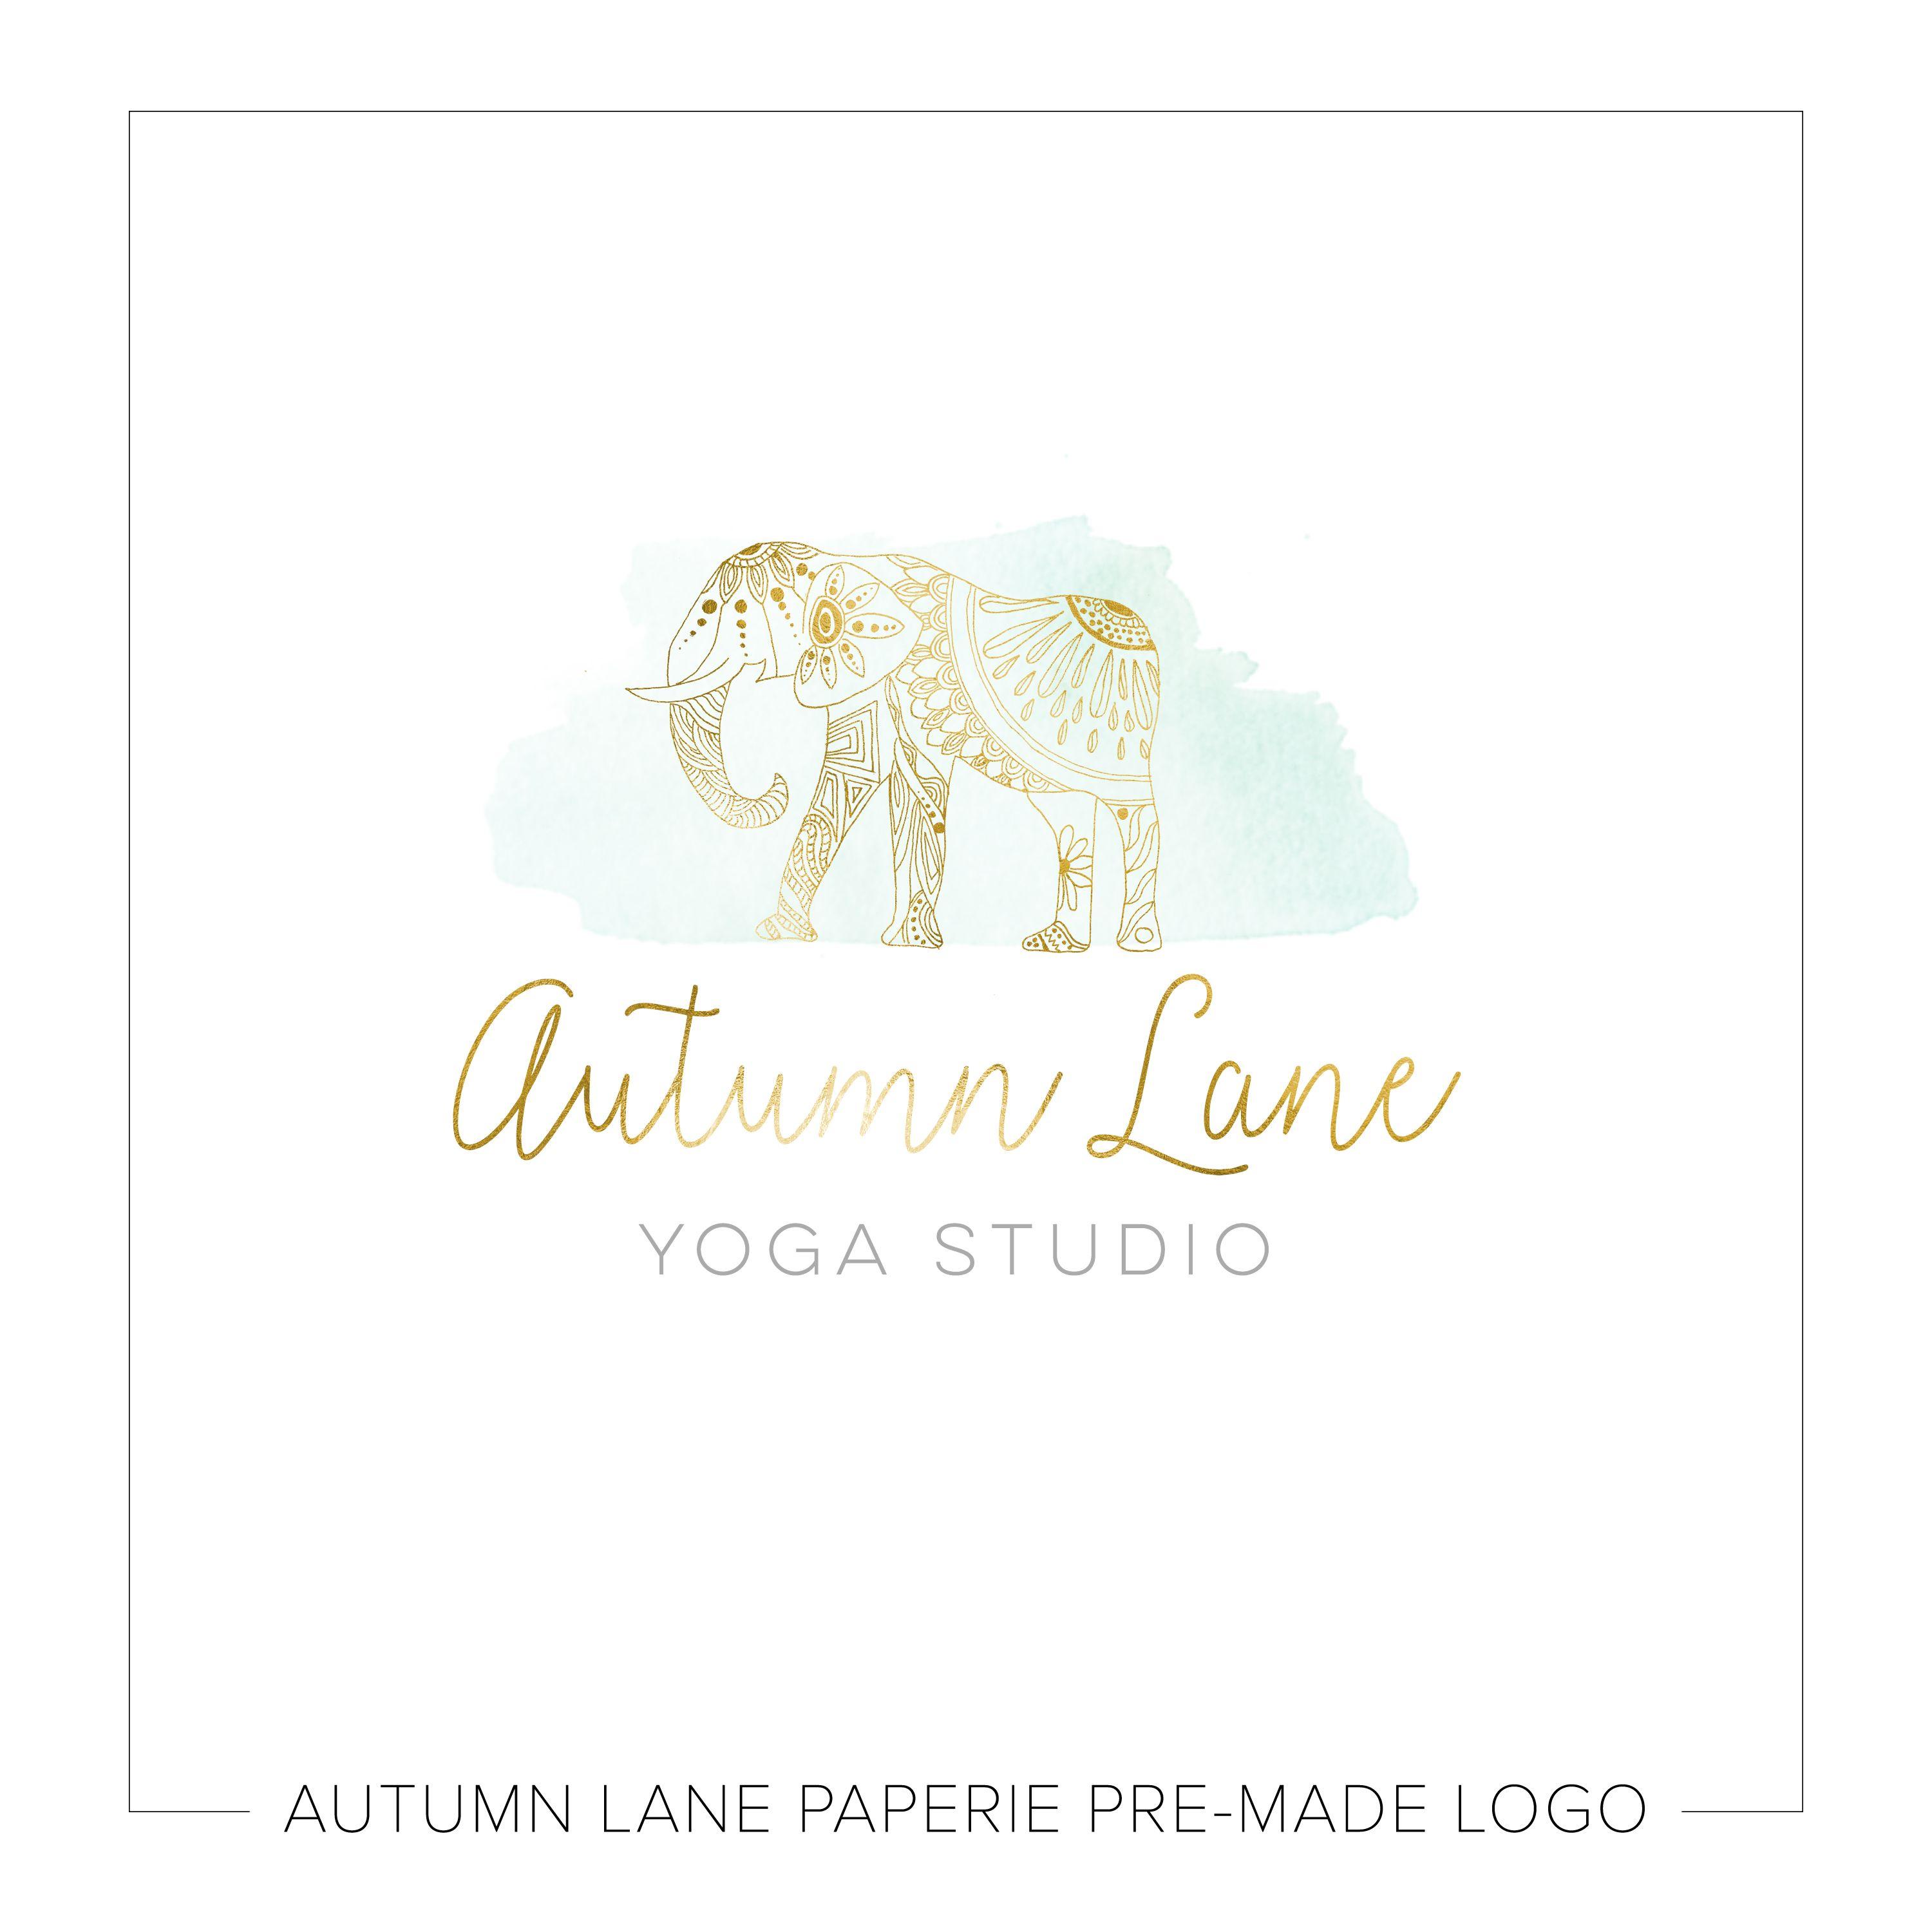 Teal and Gold Logo - Soft Teal & Gold Elephant Logo K61 | Autumn Lane Paperie